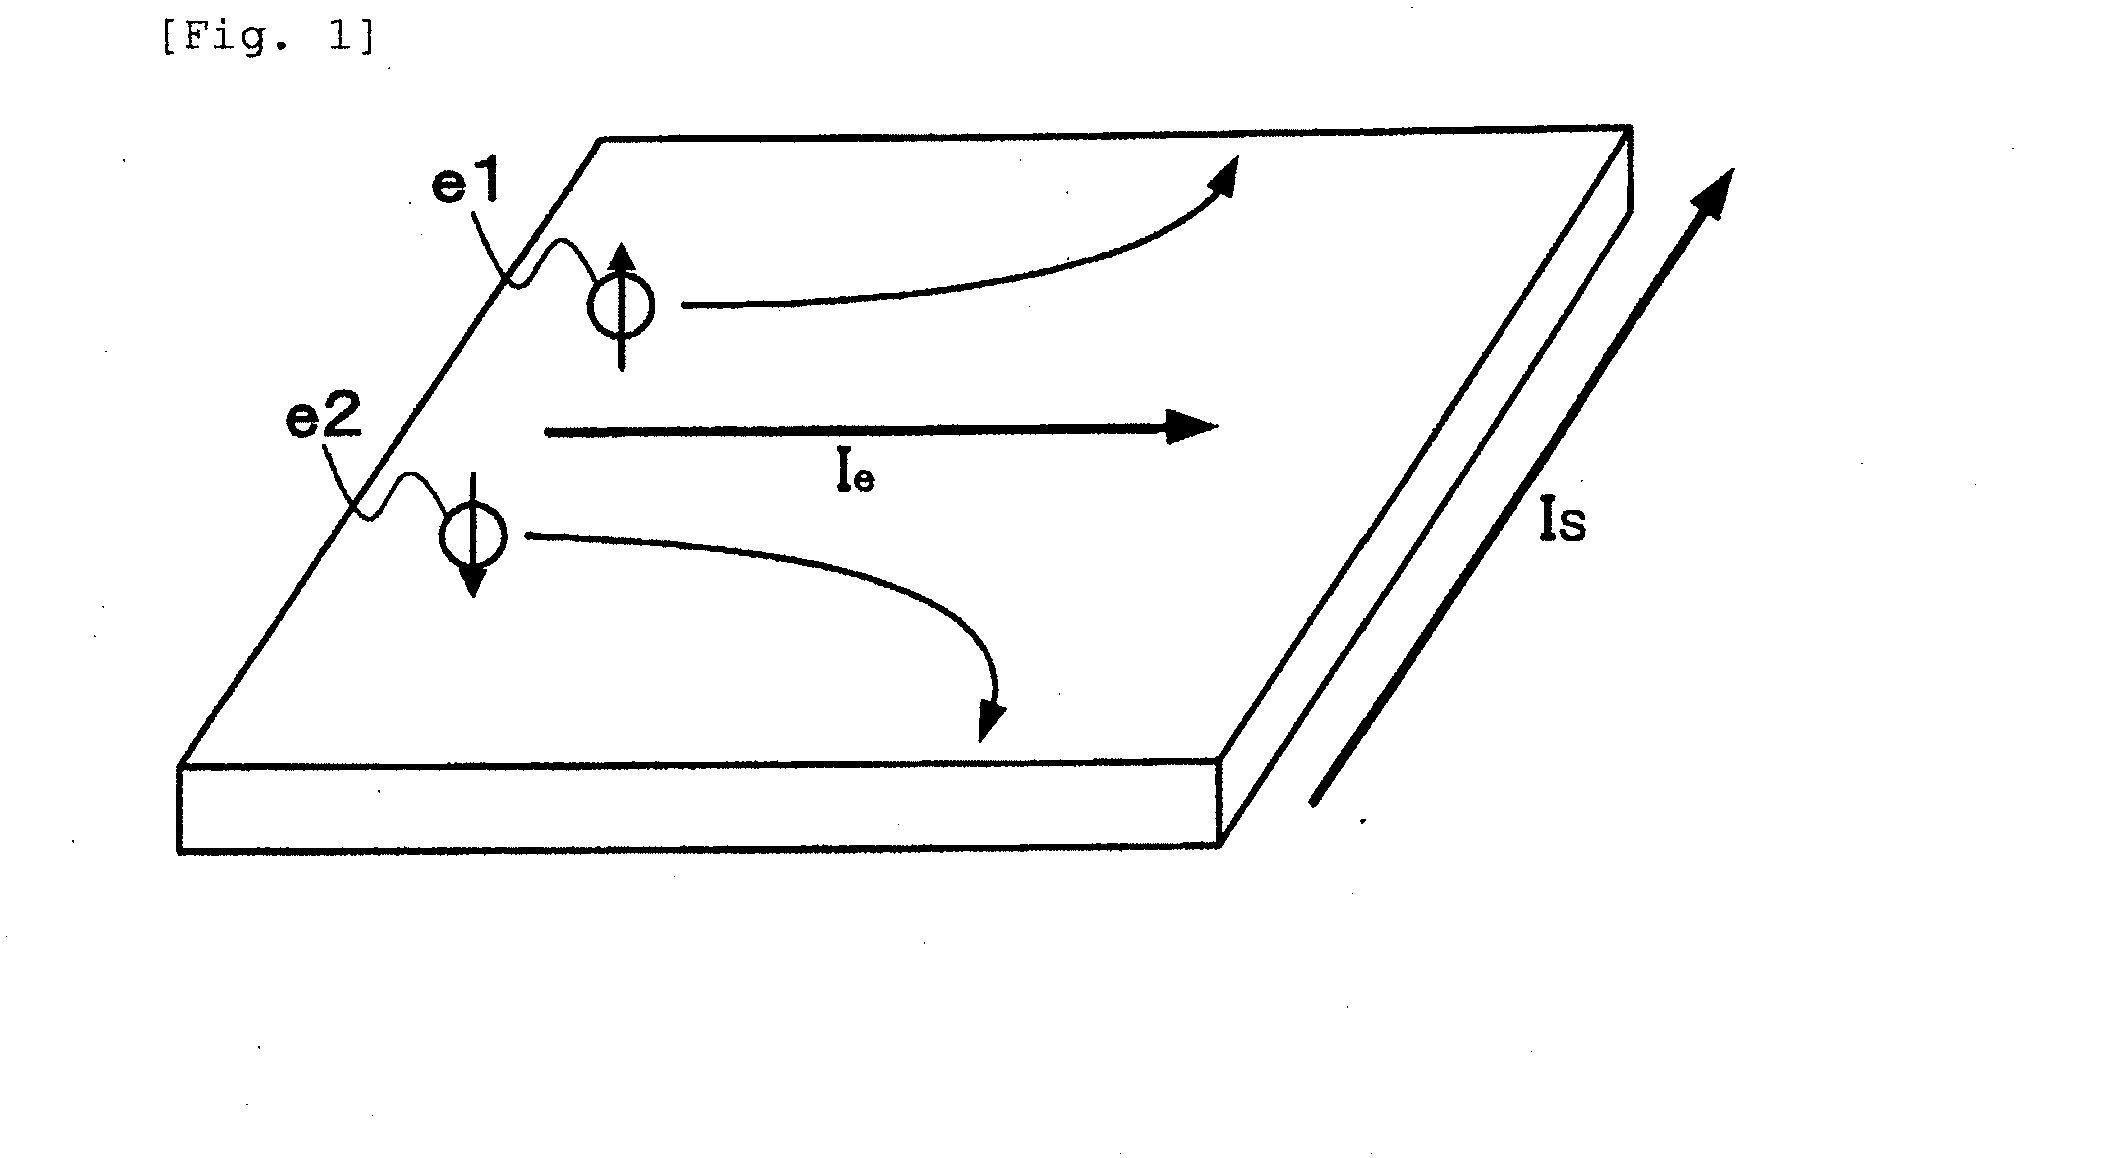 Electric current-spin current conversion device